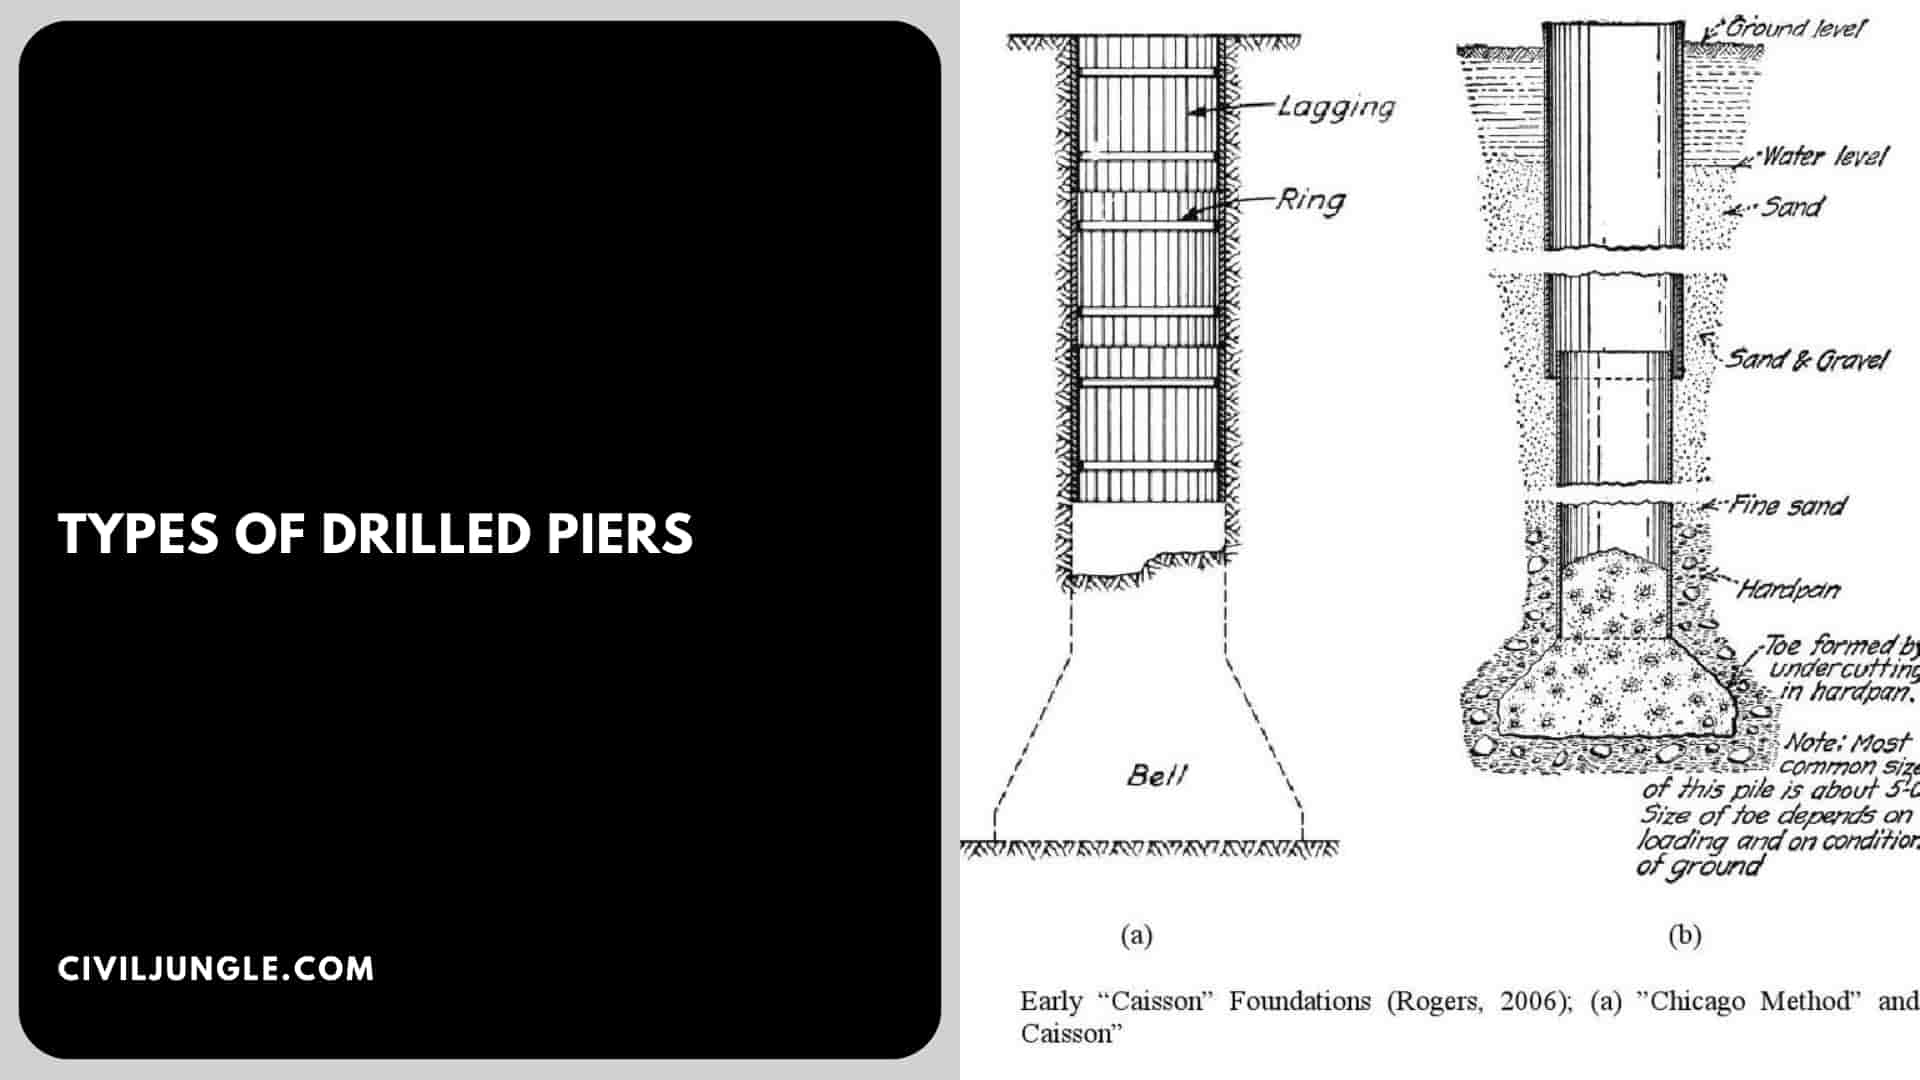 Types of Drilled Piers